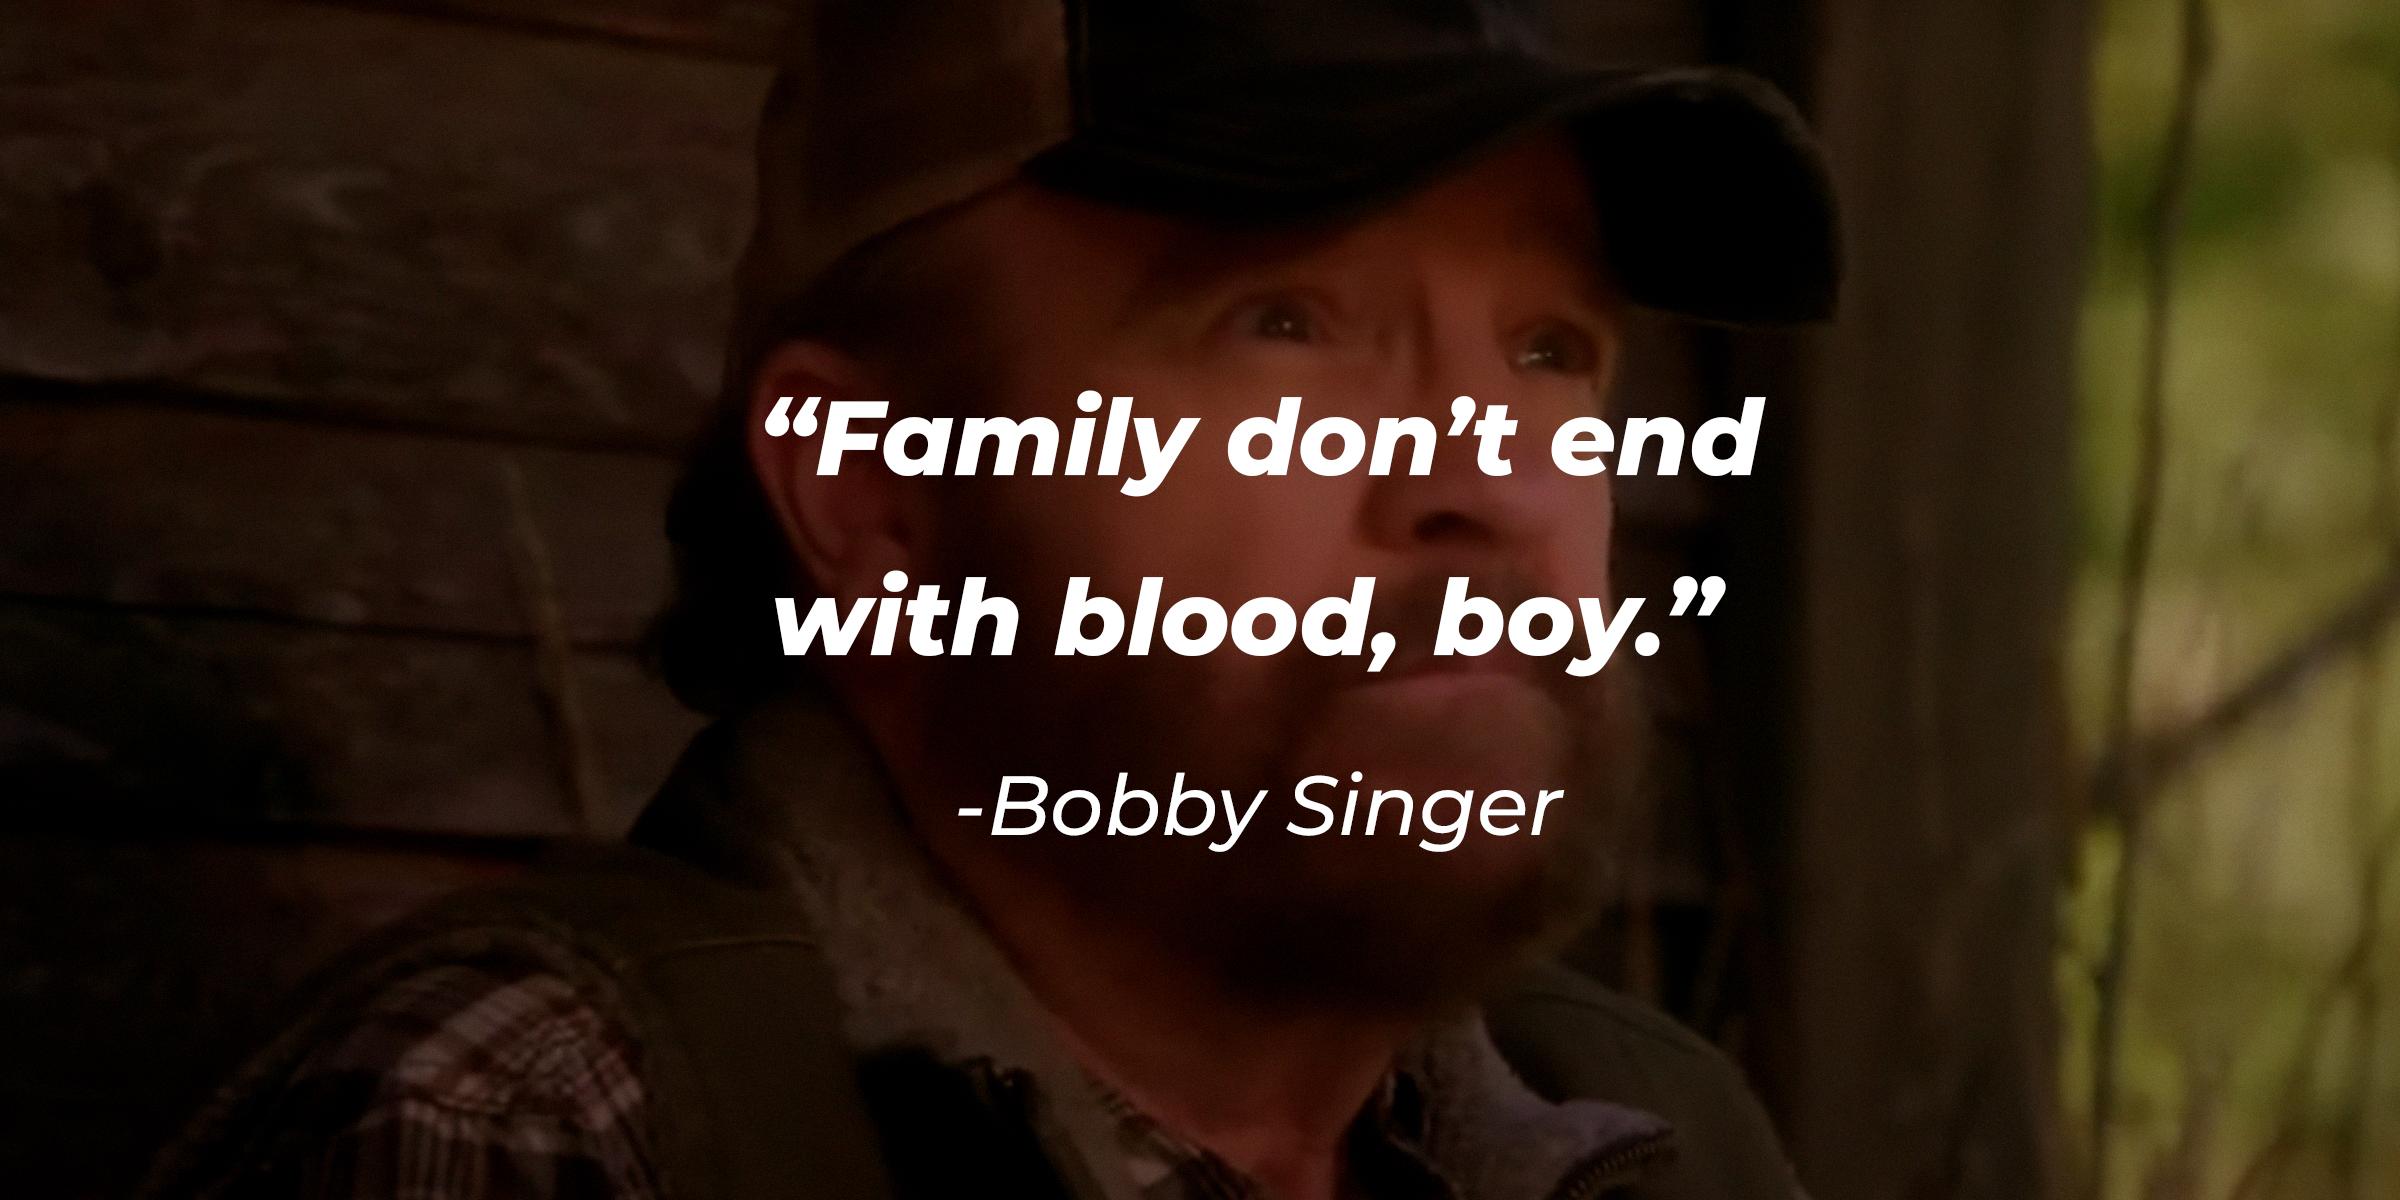 Bobby Singer with his quote: "Family don't end with blood, boy." | Source: facebook.com/Supernatural